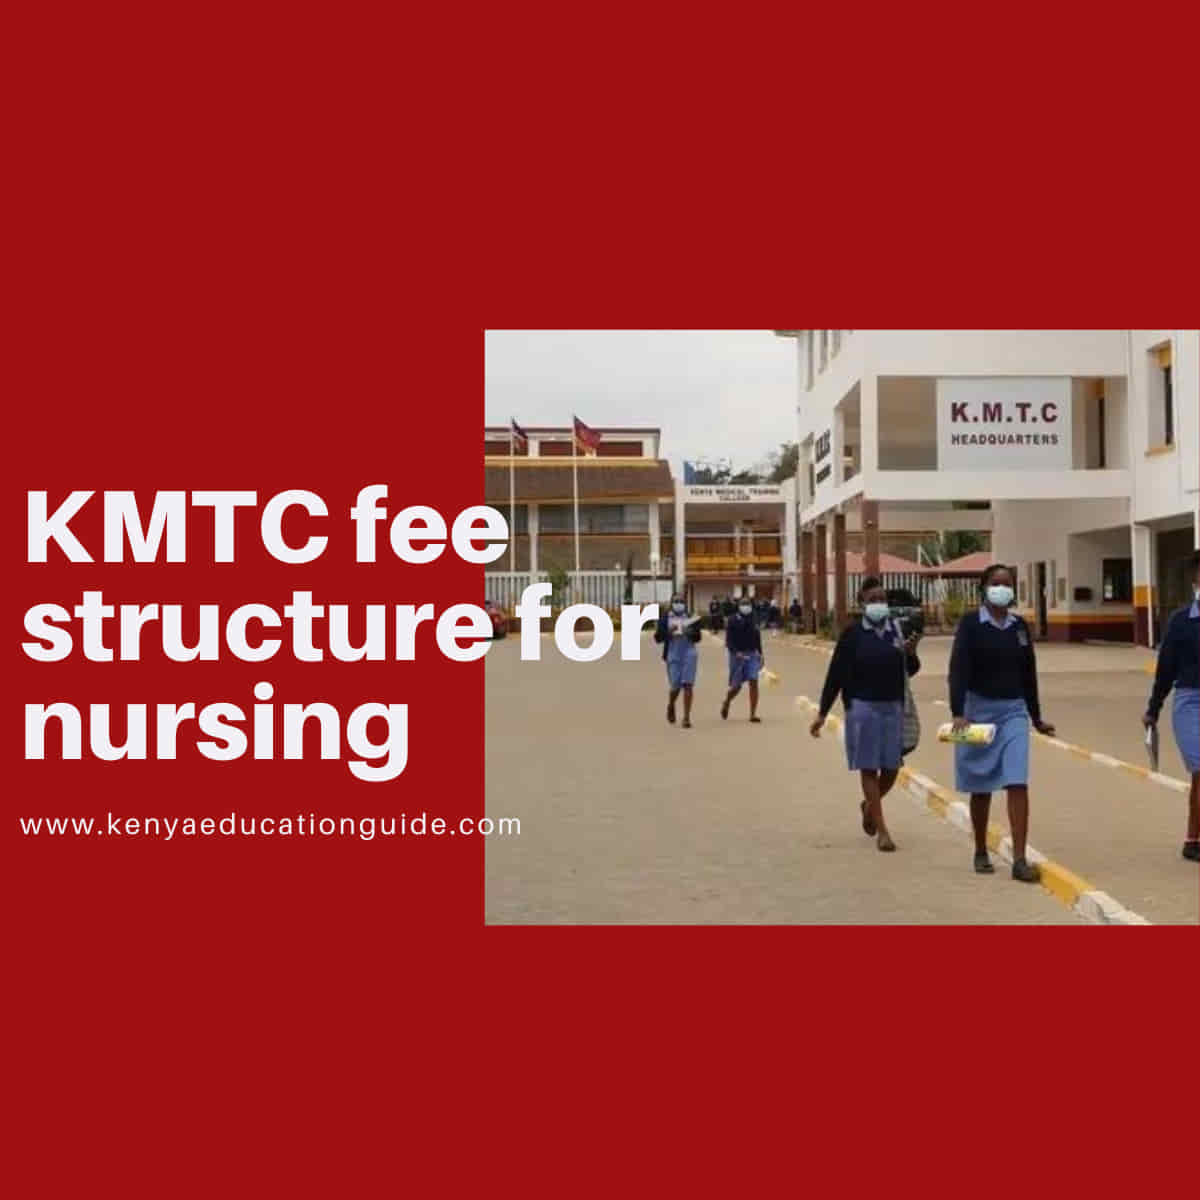 KMTC fee structure for nursing